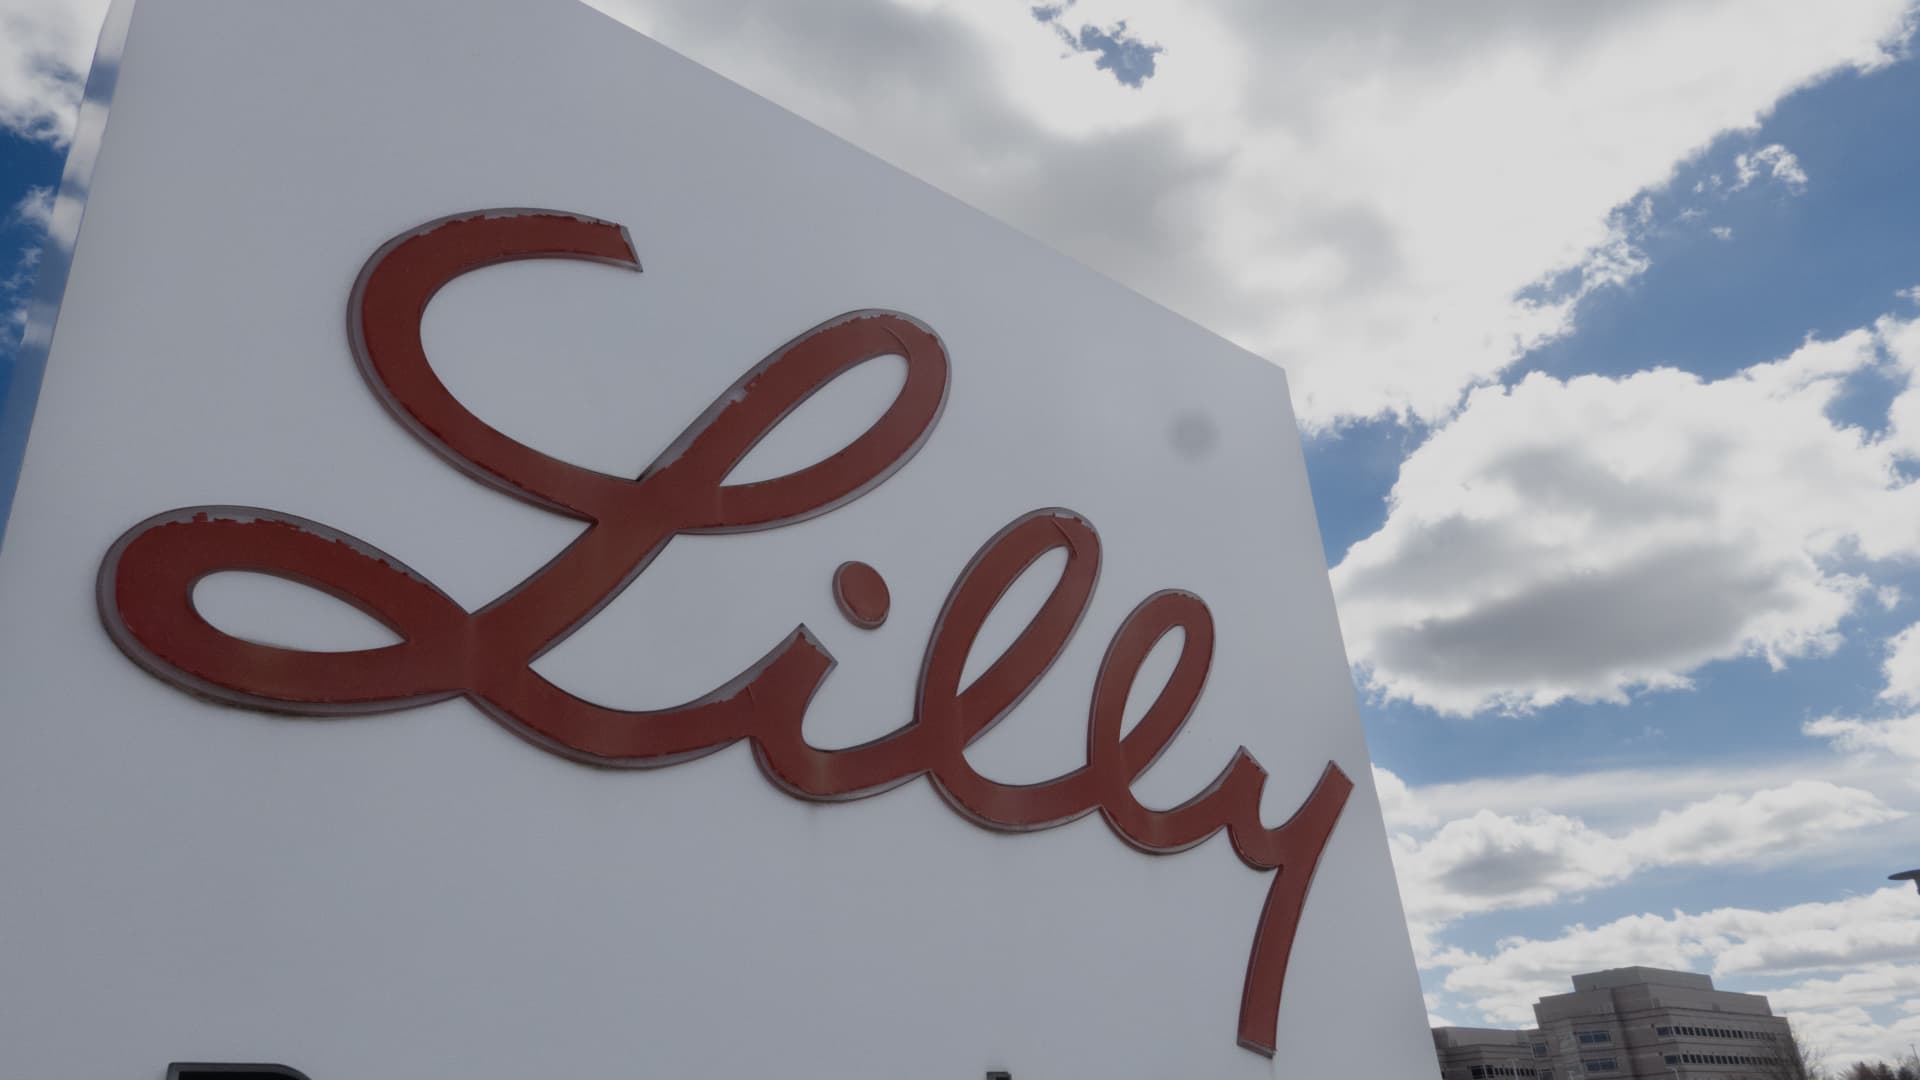 Stocks making the biggest premarket moves: Eli Lilly, Travelers, United Airlines, Alcoa and more